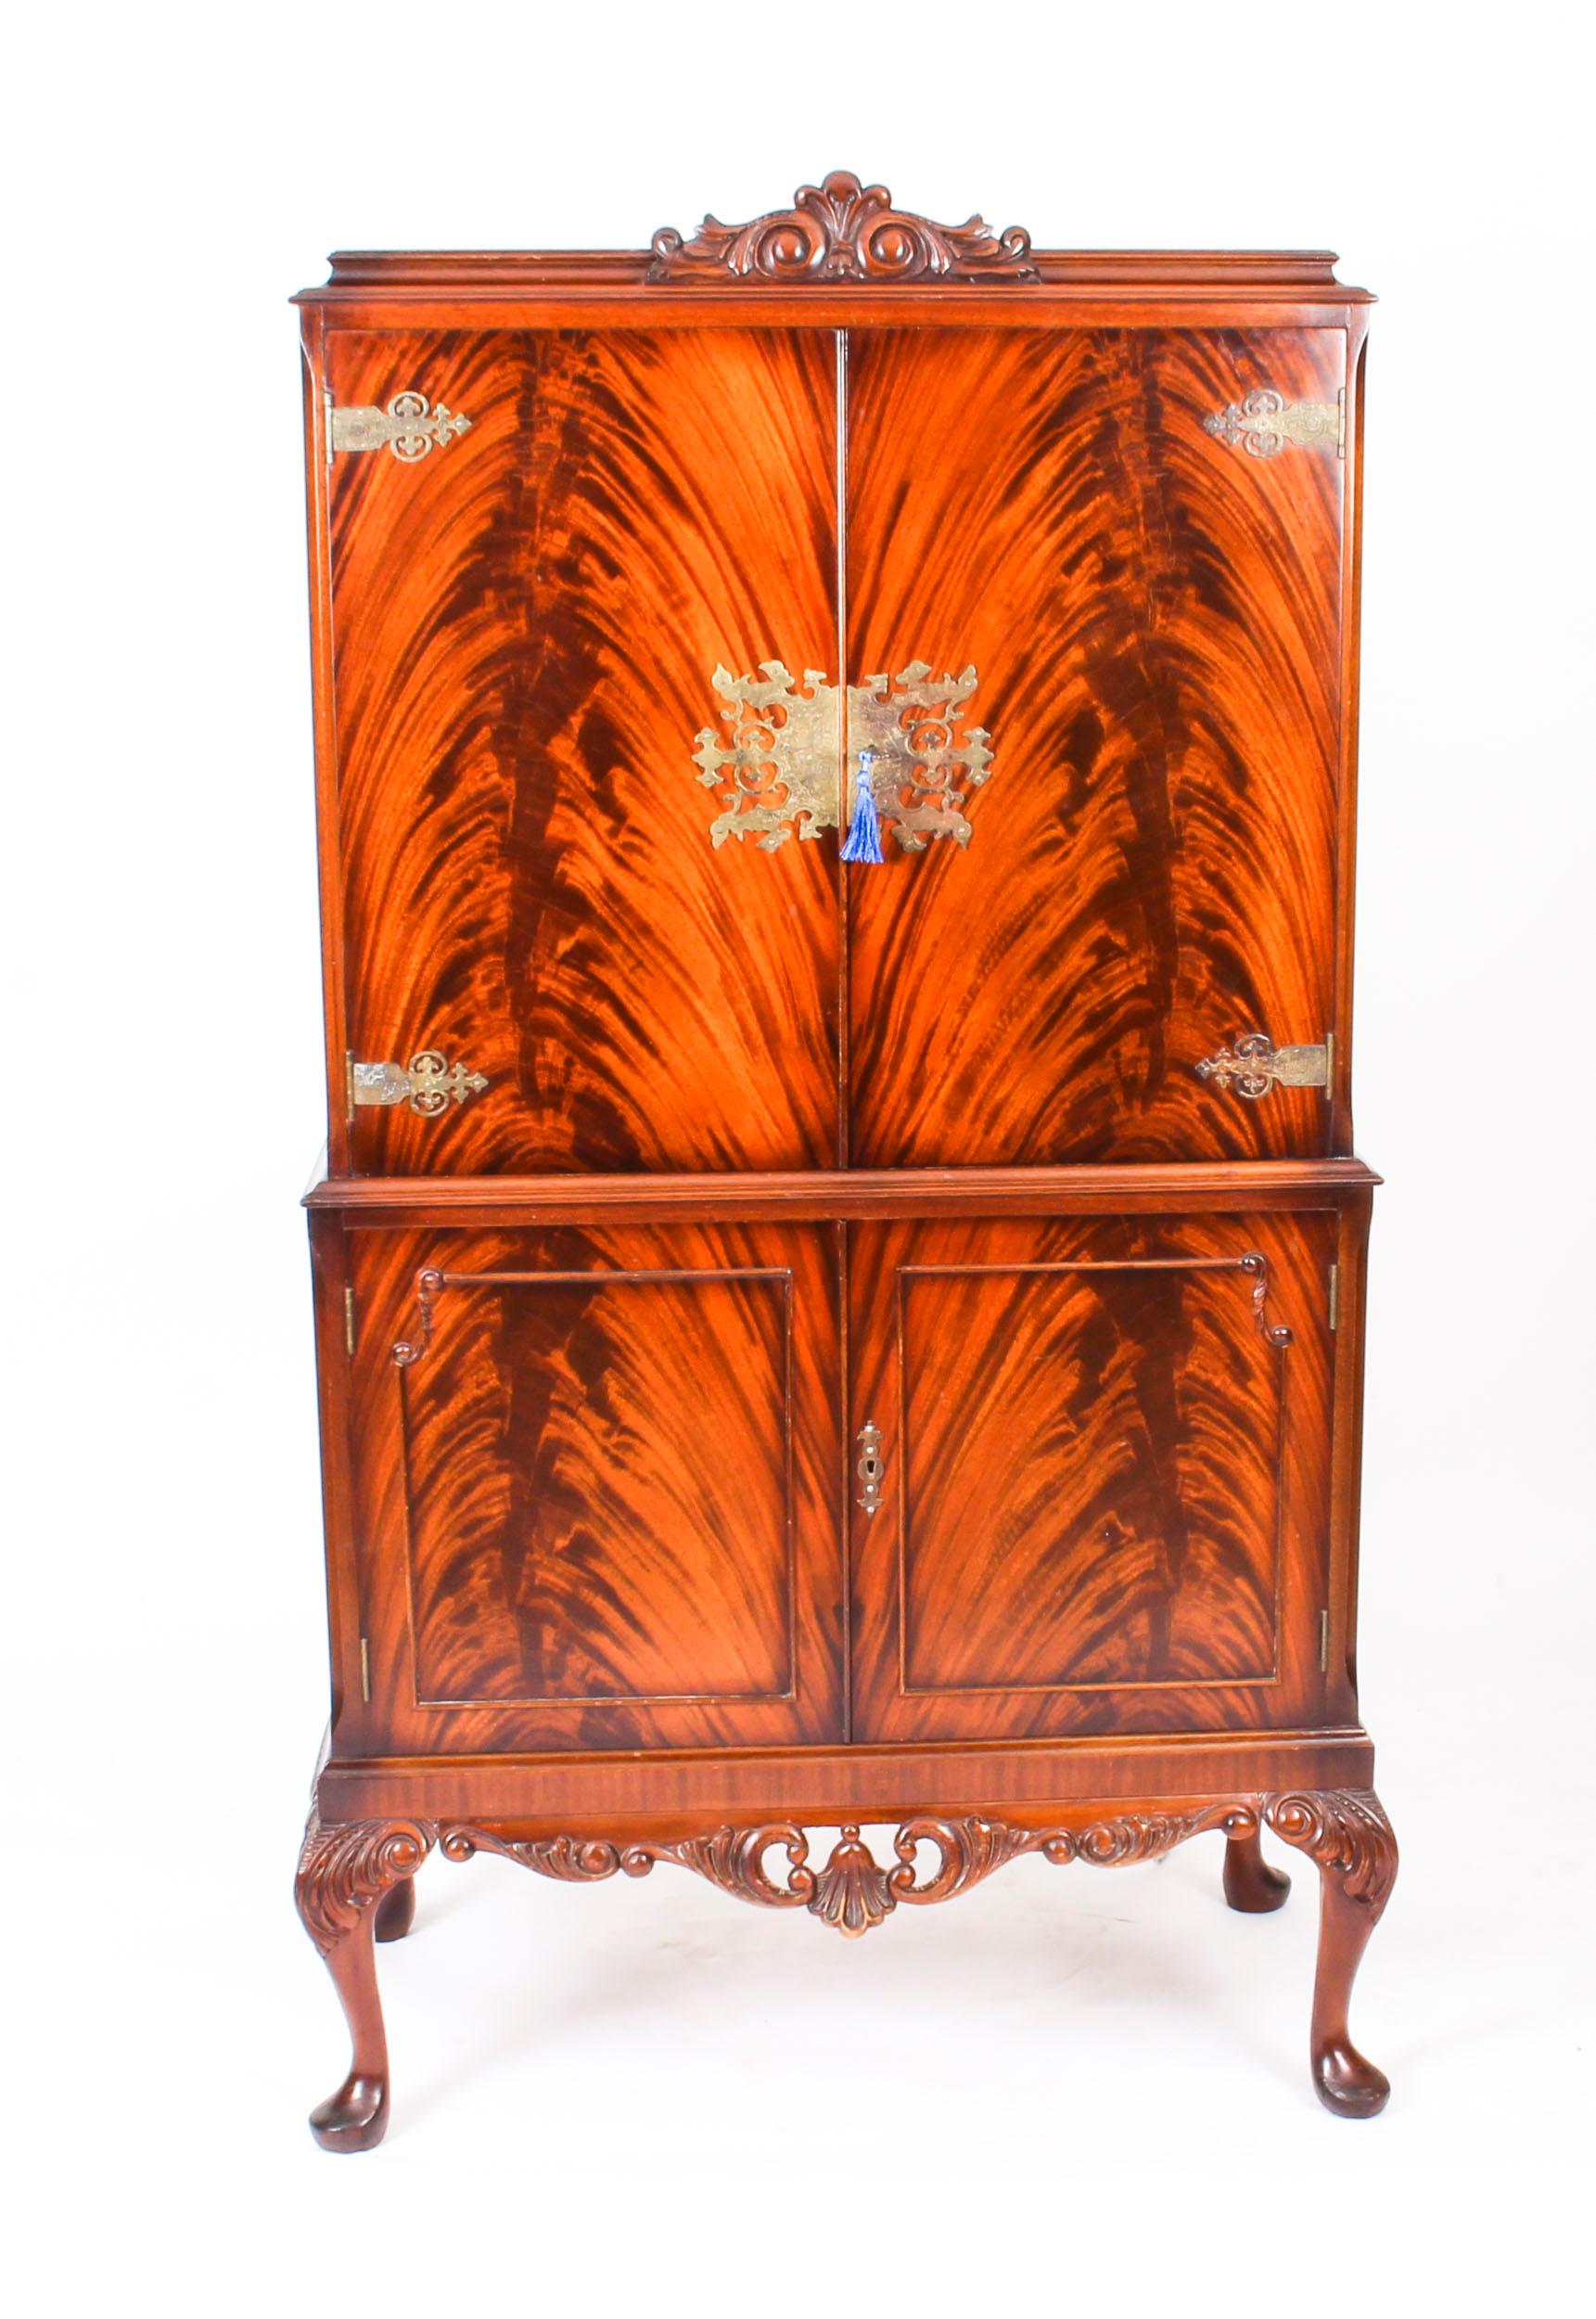 This is a fantastic vintage flame mahogany cocktail cabinet with fitted and mirrored interior and brass mounts, dating from the mid 20th Century.

The upper part comprises a pair of doors that have beautiful small shelves with brass galleries on